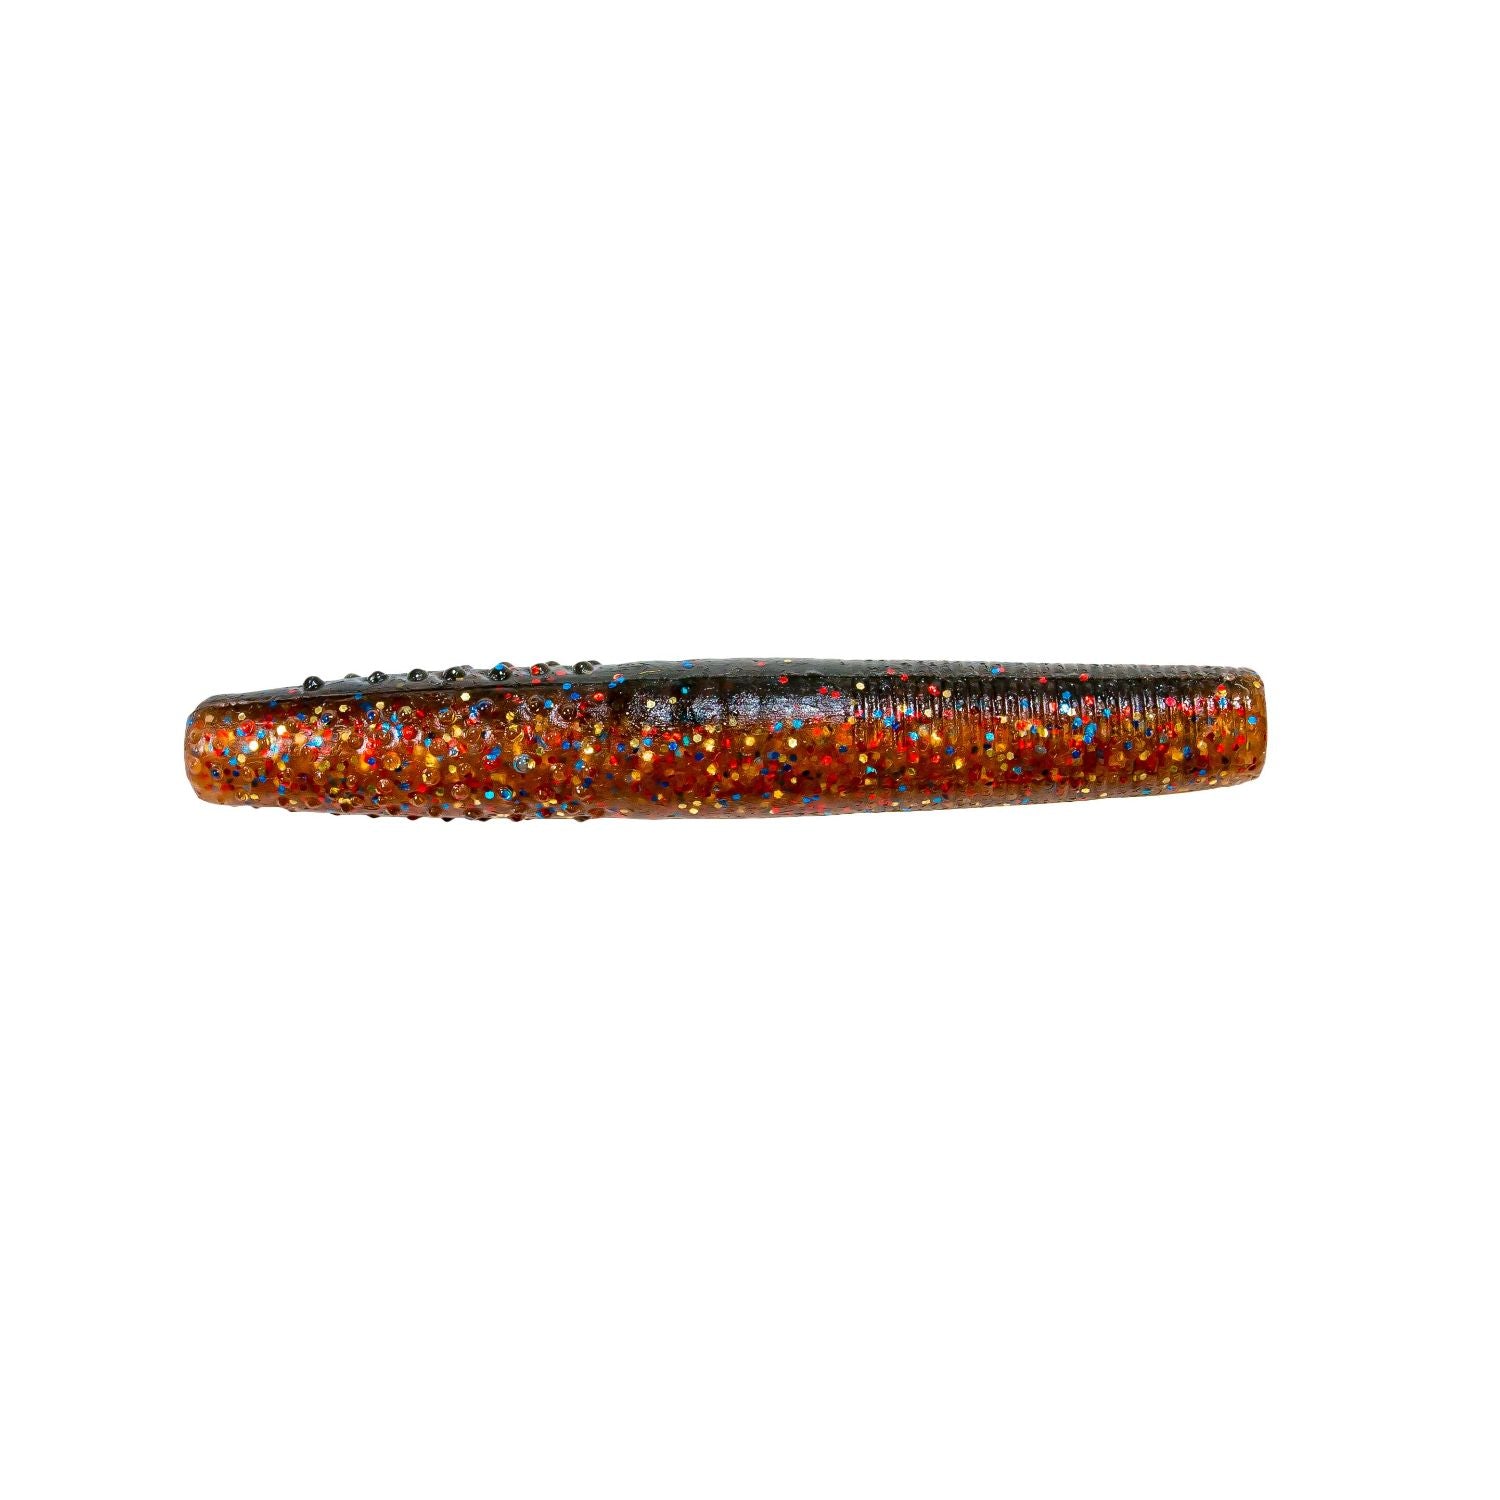 Molting Craw 8 Pk 2.75 in Zman Finesse TRD Ned Rig from Fish On Outlet